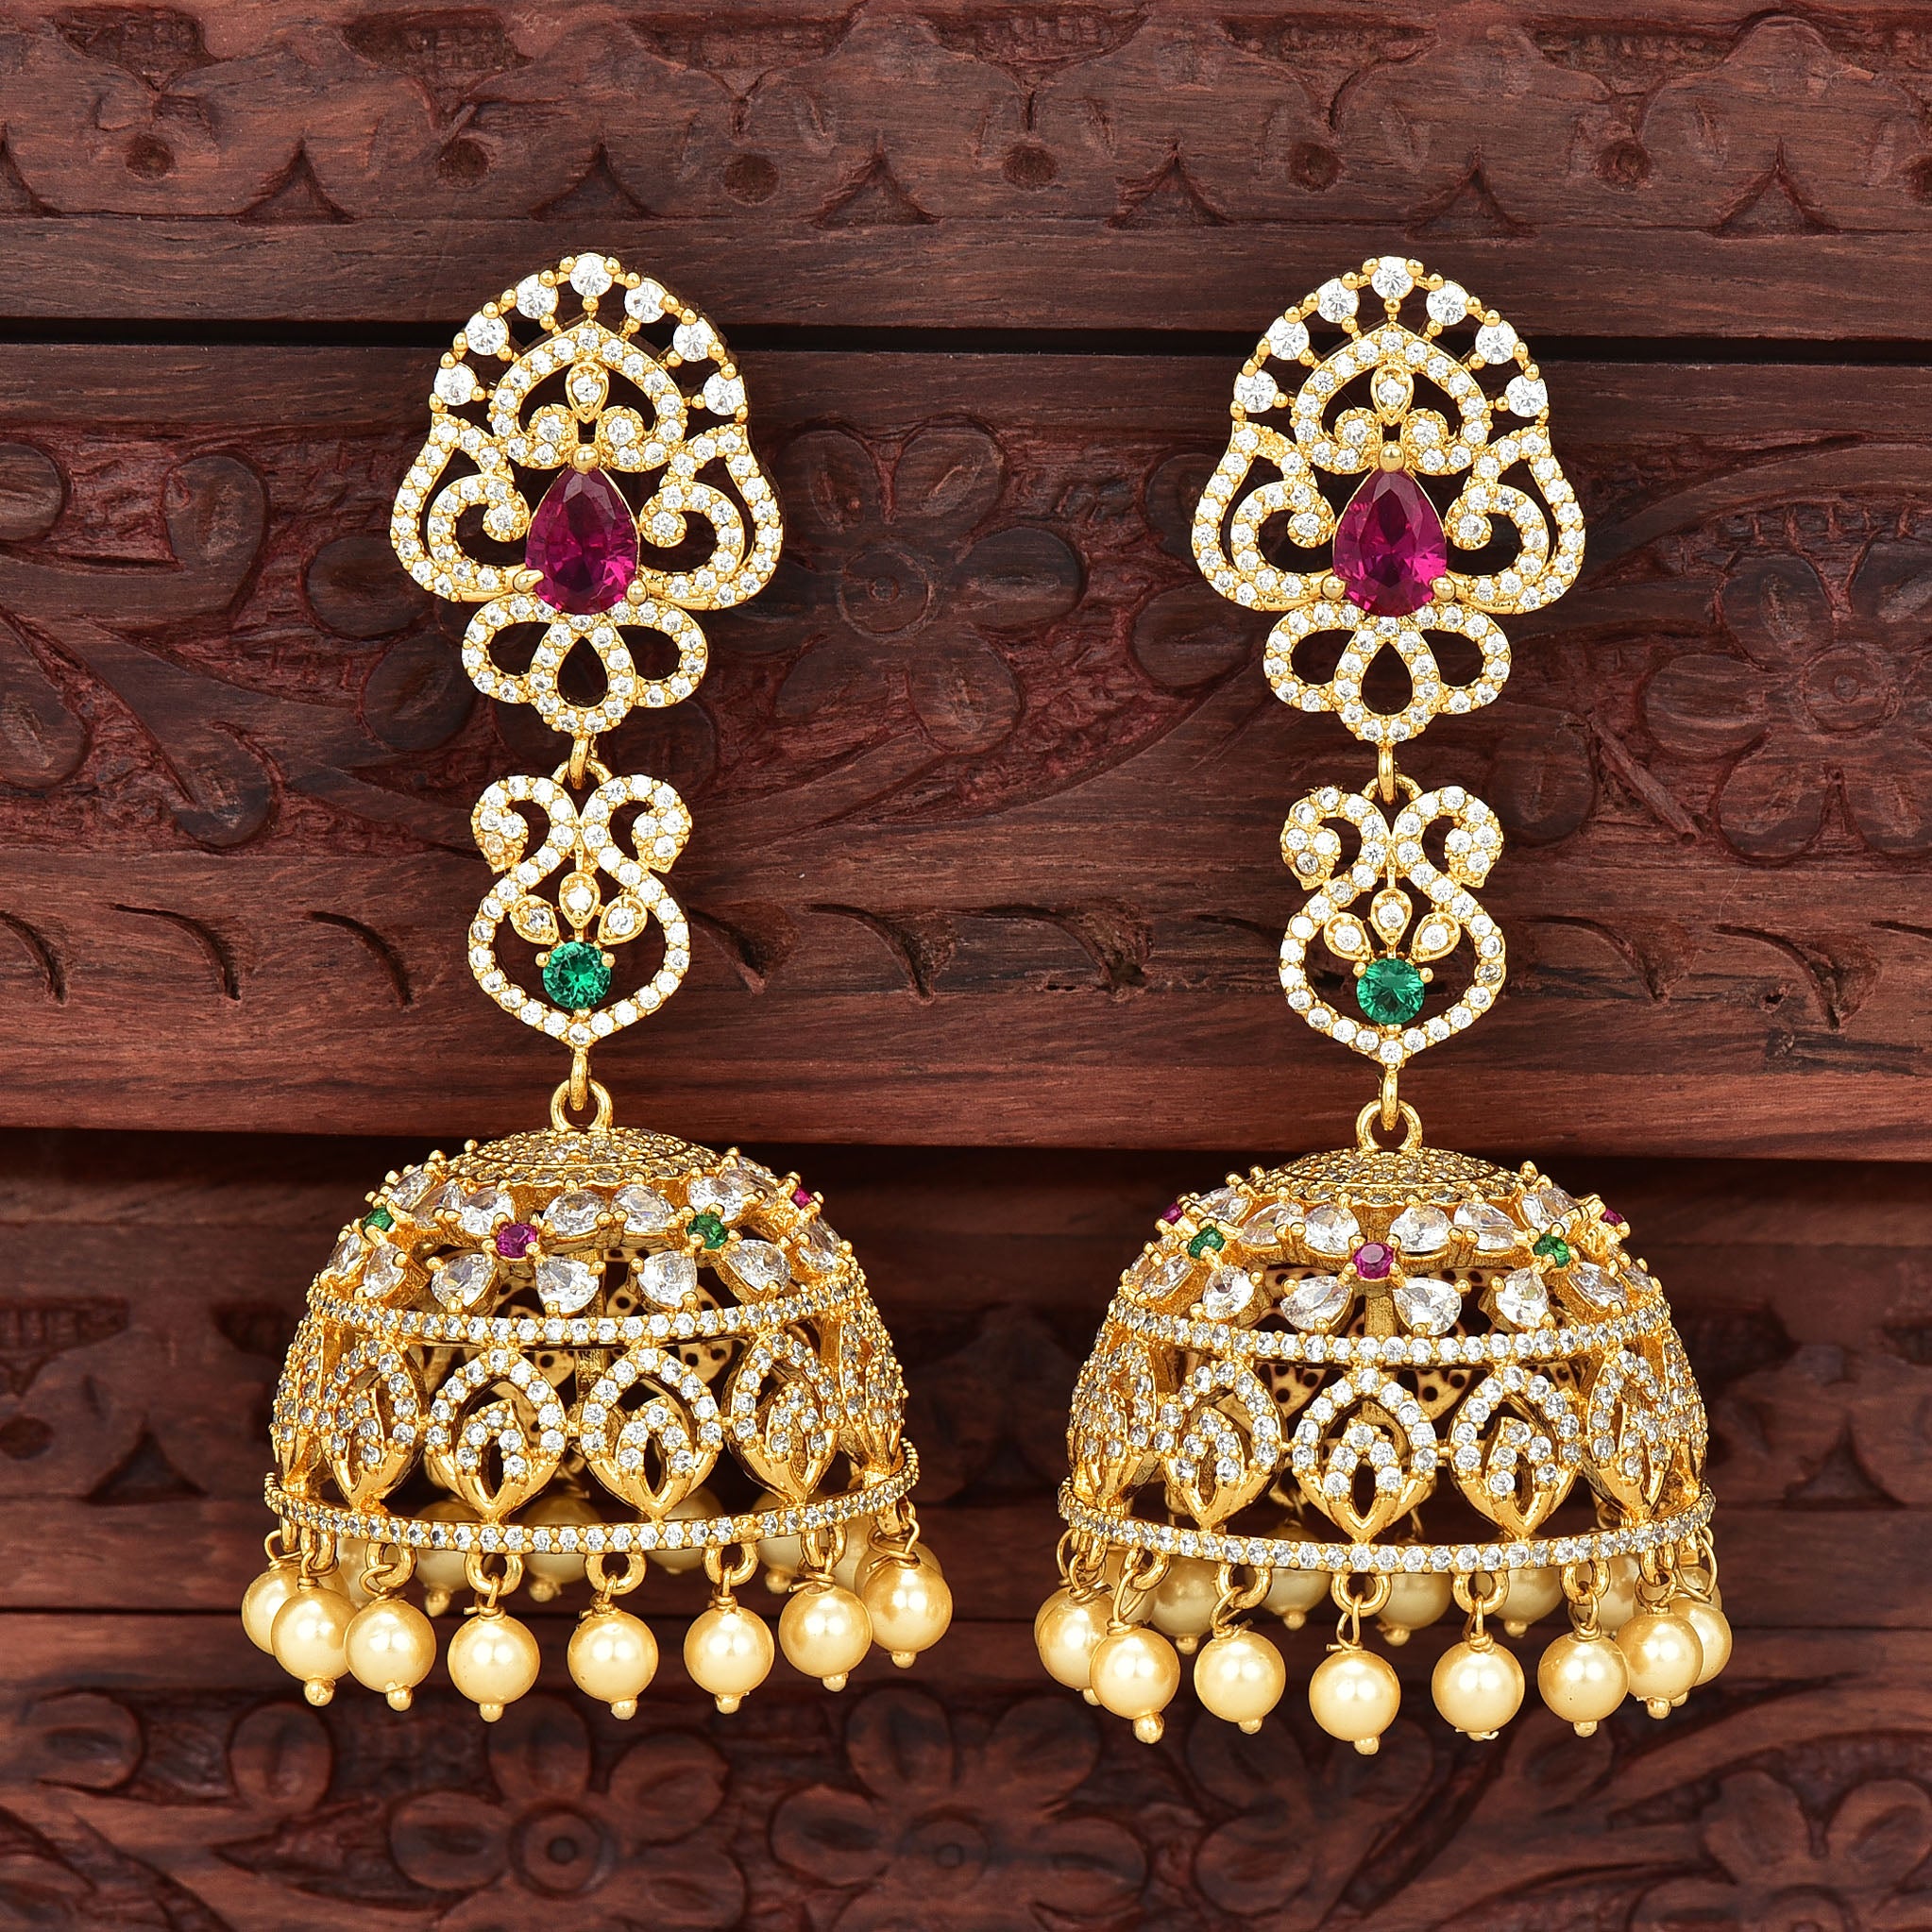 Buy Impon Stone Layer Jhumka Earrings Gold Design for Wedding